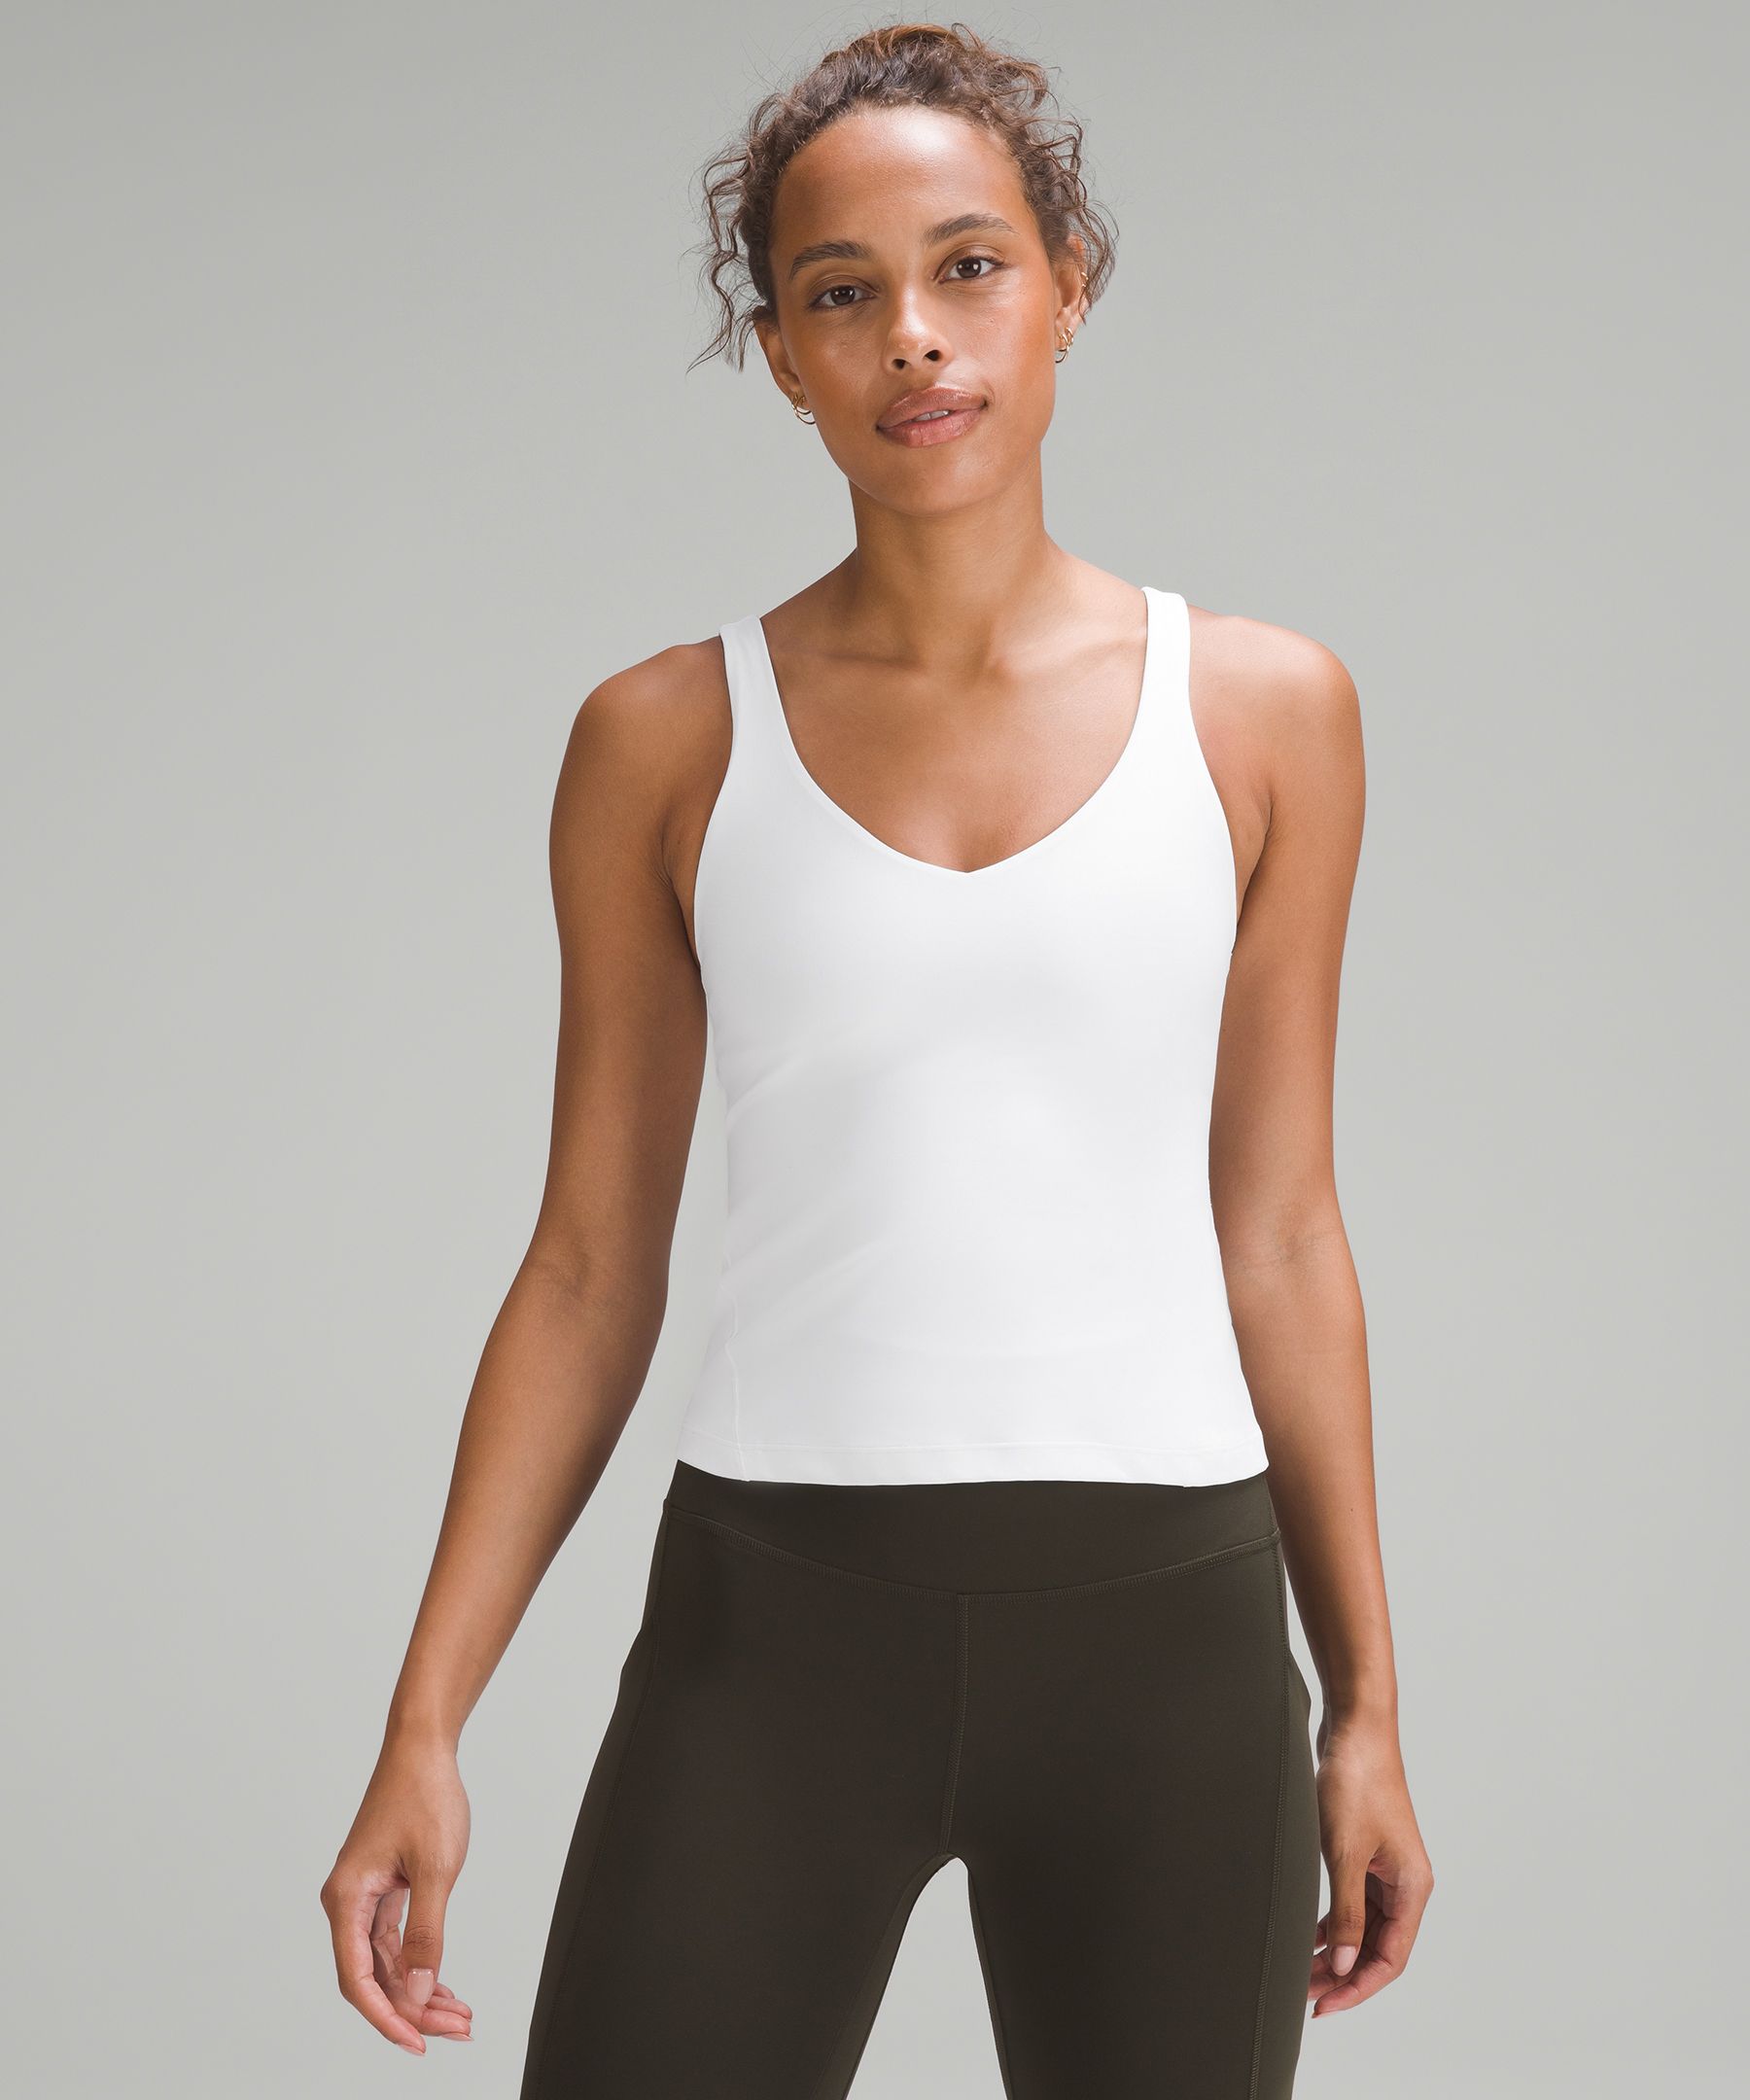 Lululemon shoppers say this is the 'perfect tank top' — and it's